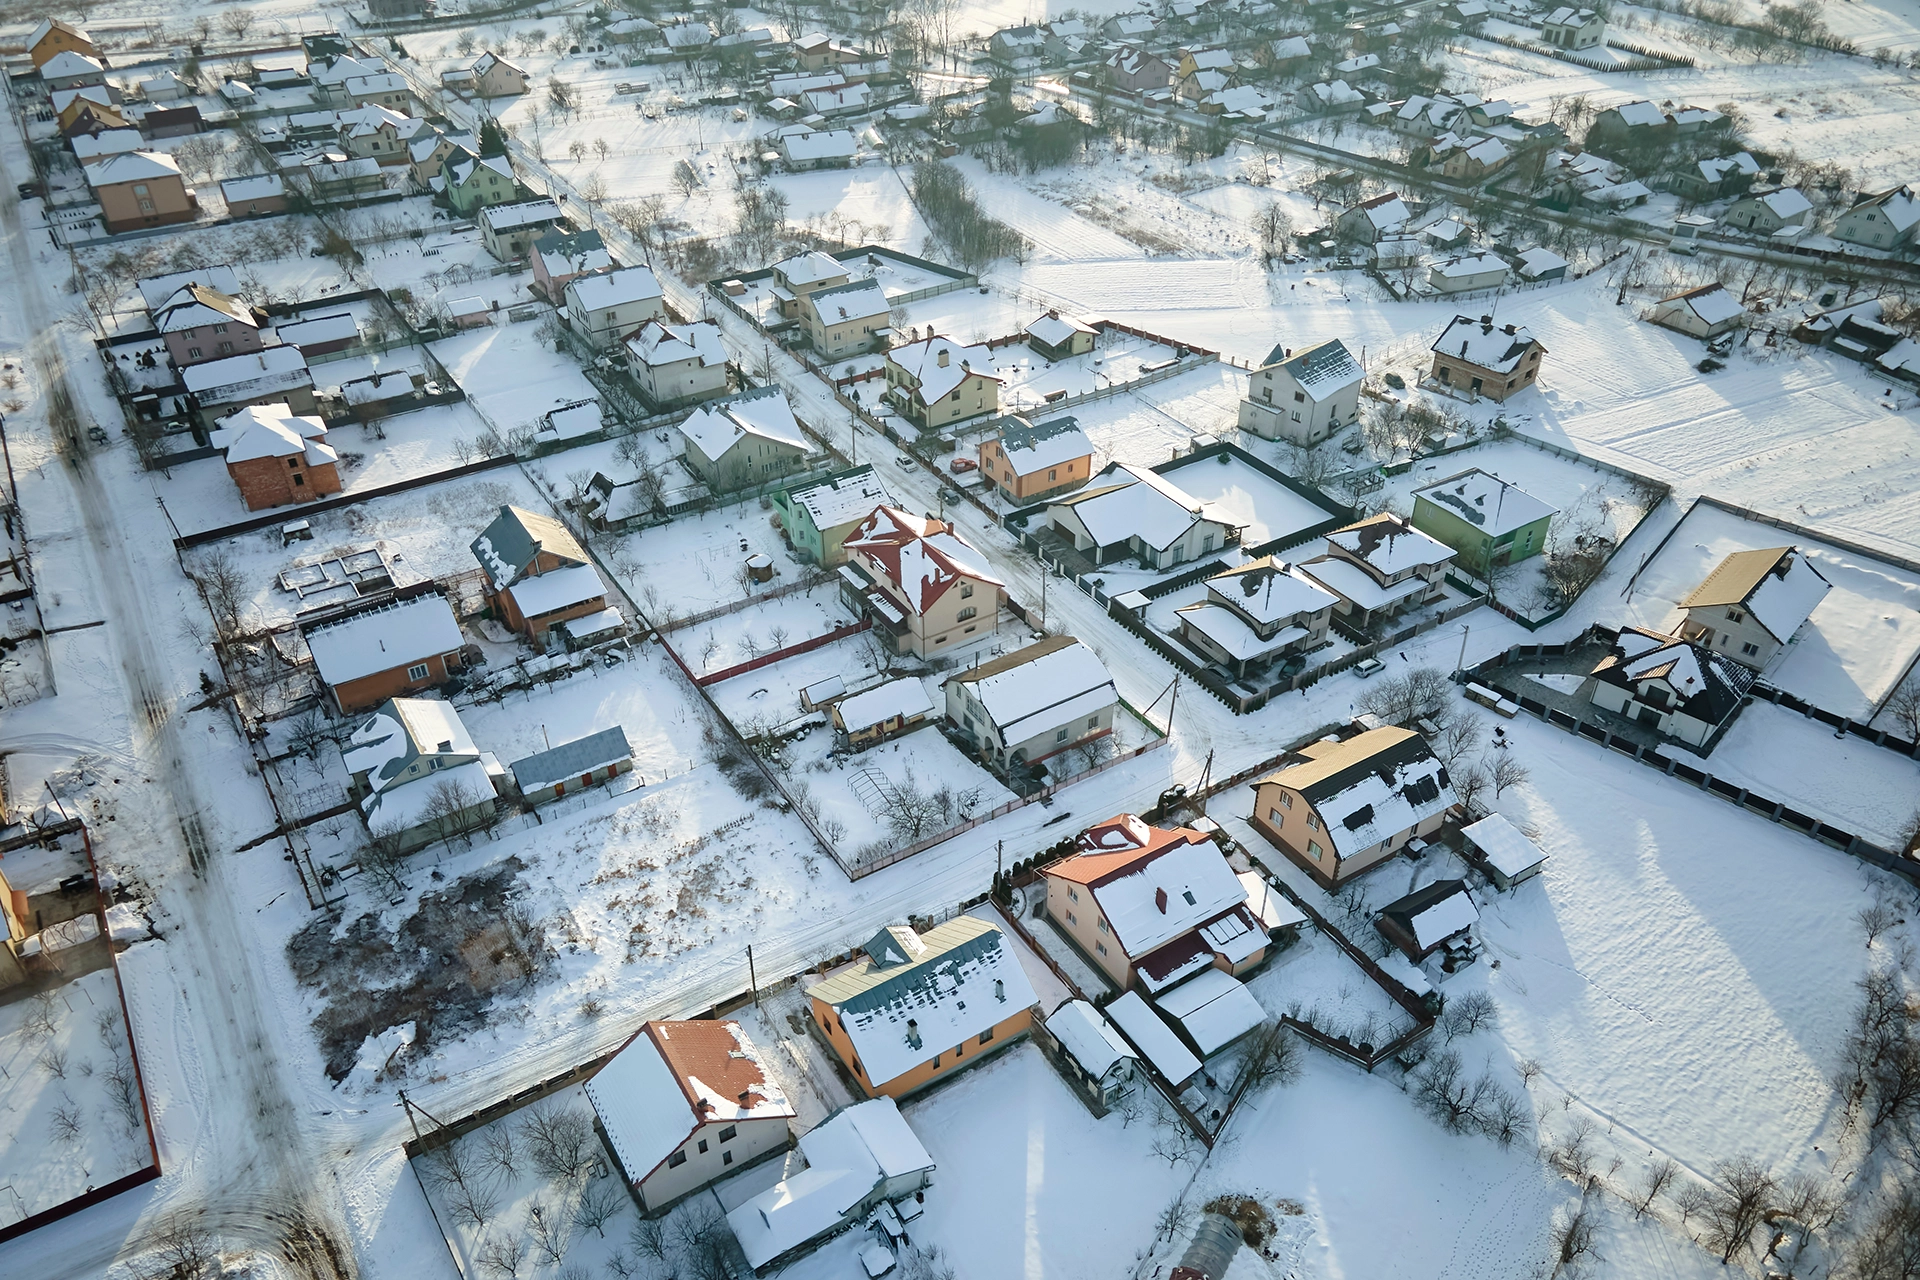 A bird's eye view of a community in the winter with snow.